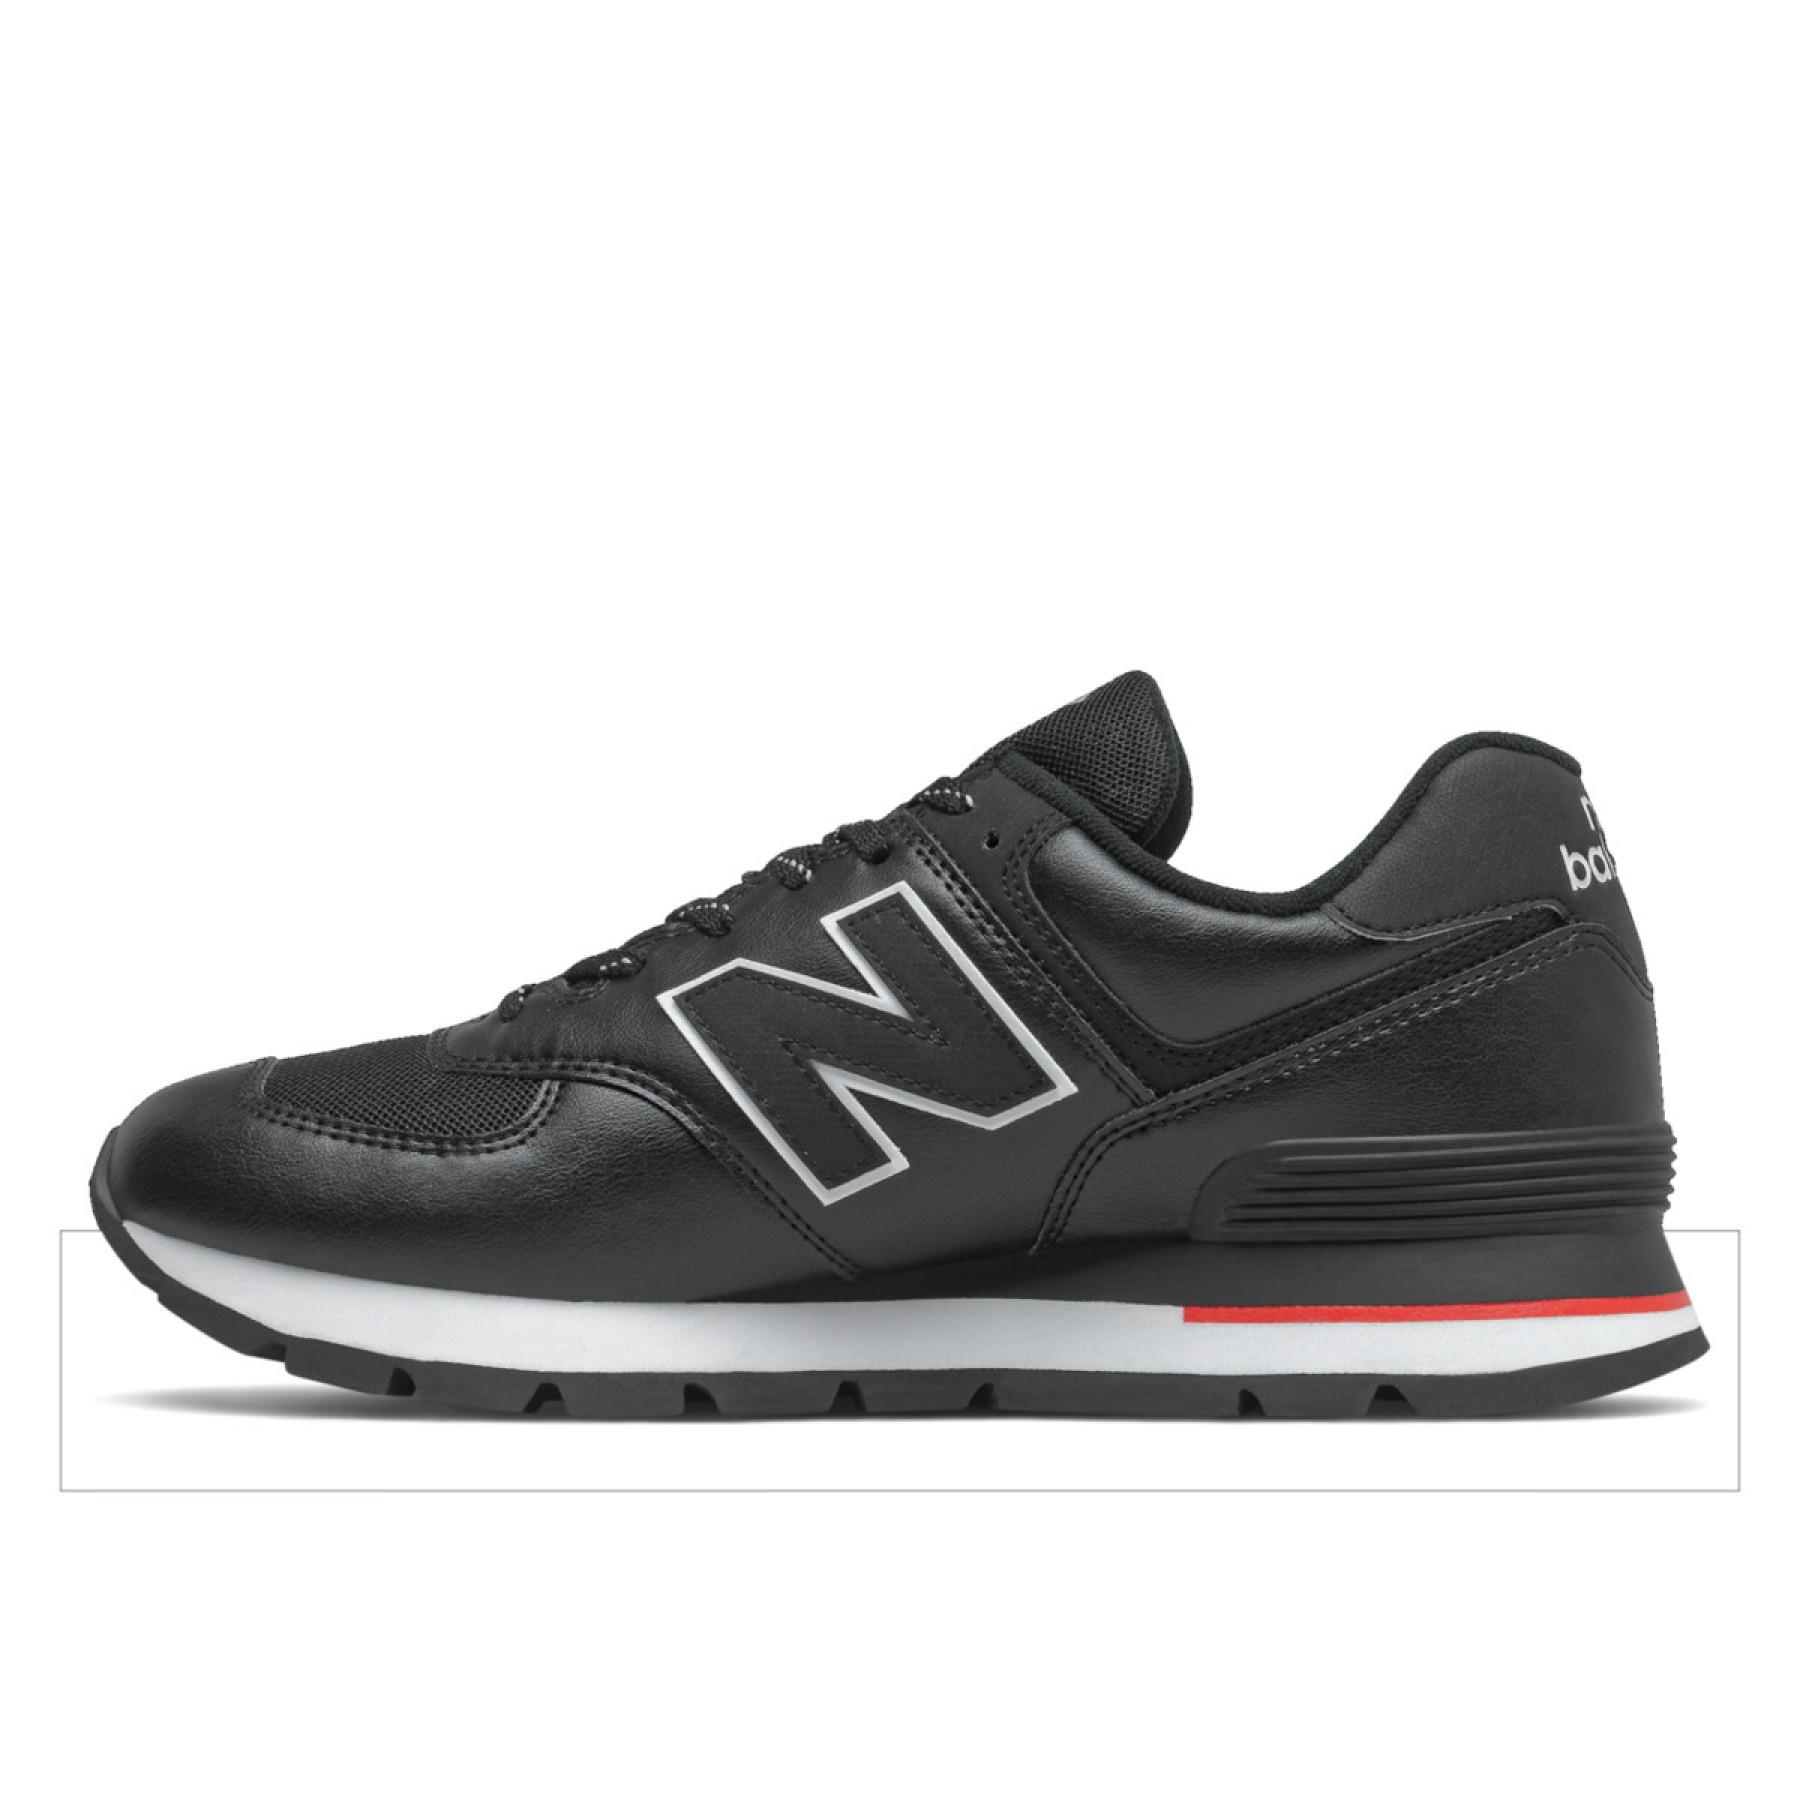 Formadores New Balance 574 rugged